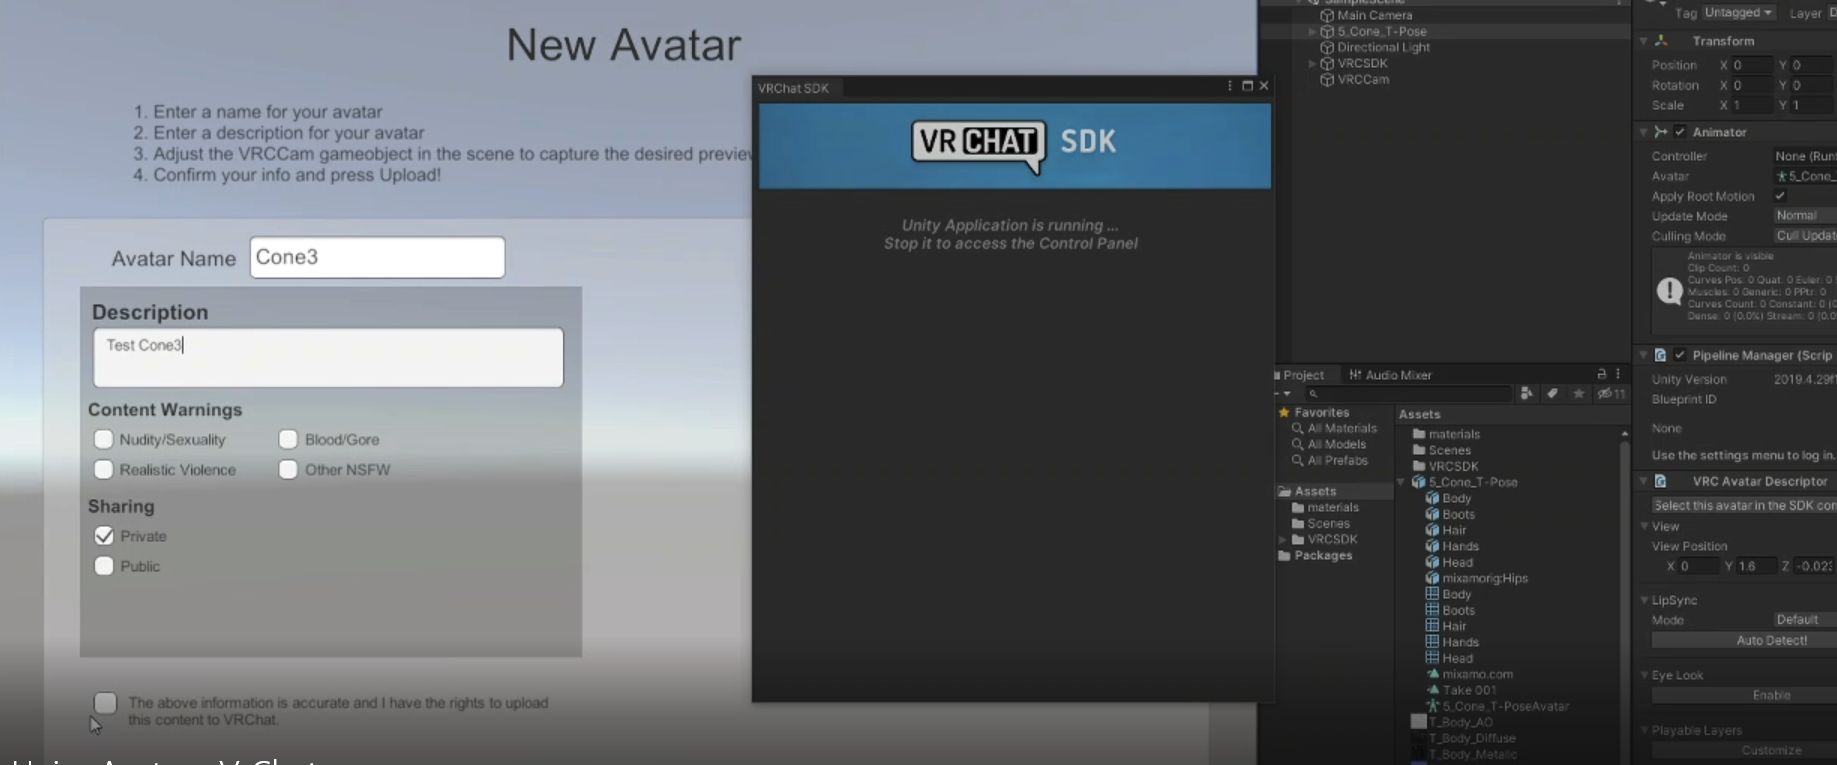 How to upload an Avatar to VRChat from Unity software. Union Avatars